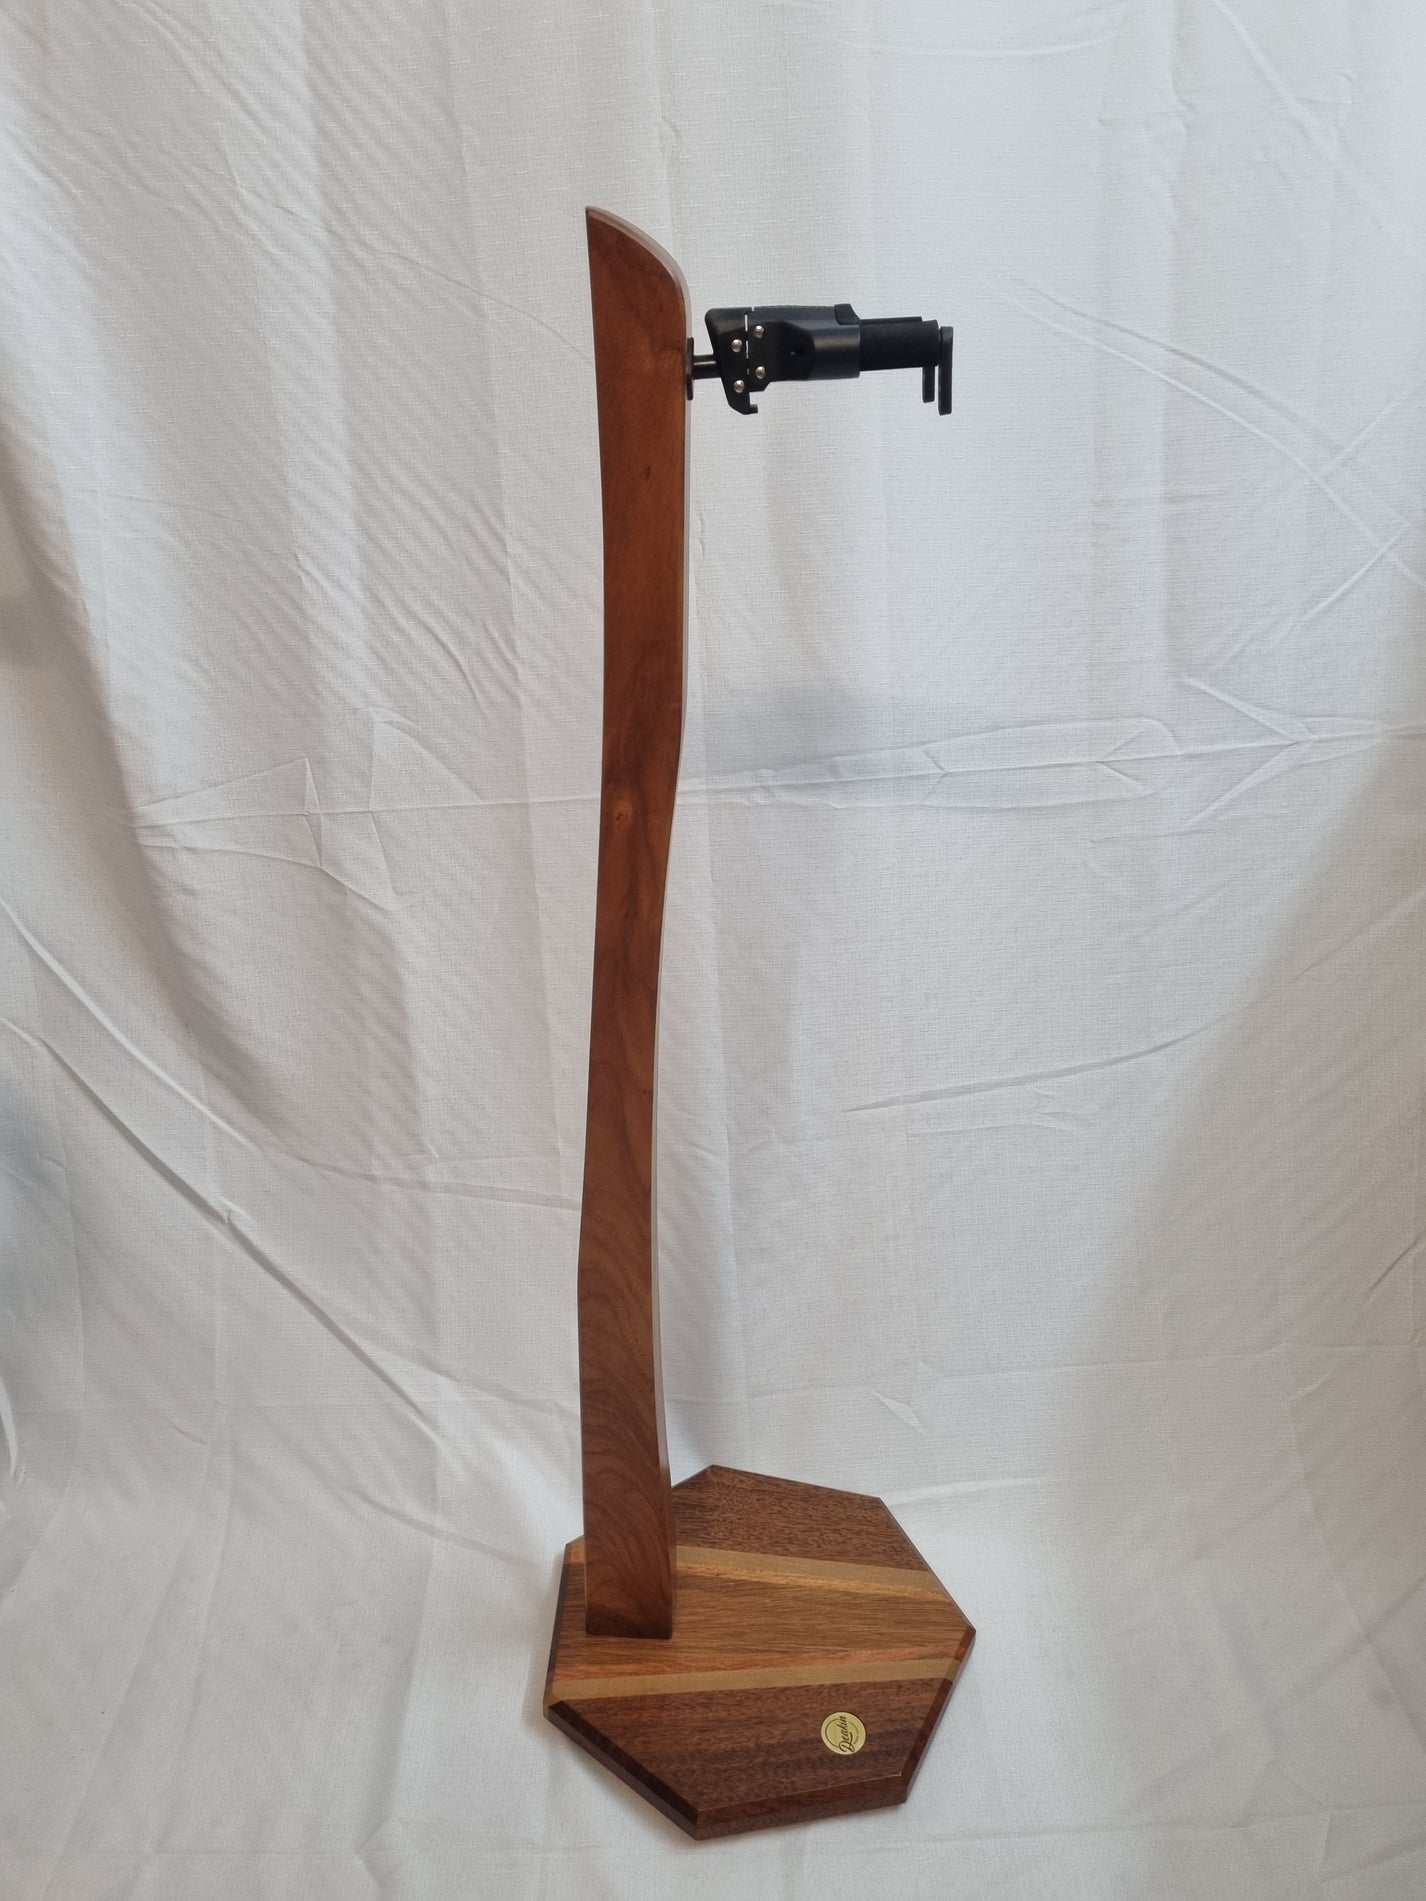 Deakin Wood Company Instrument Stand - Rosewood